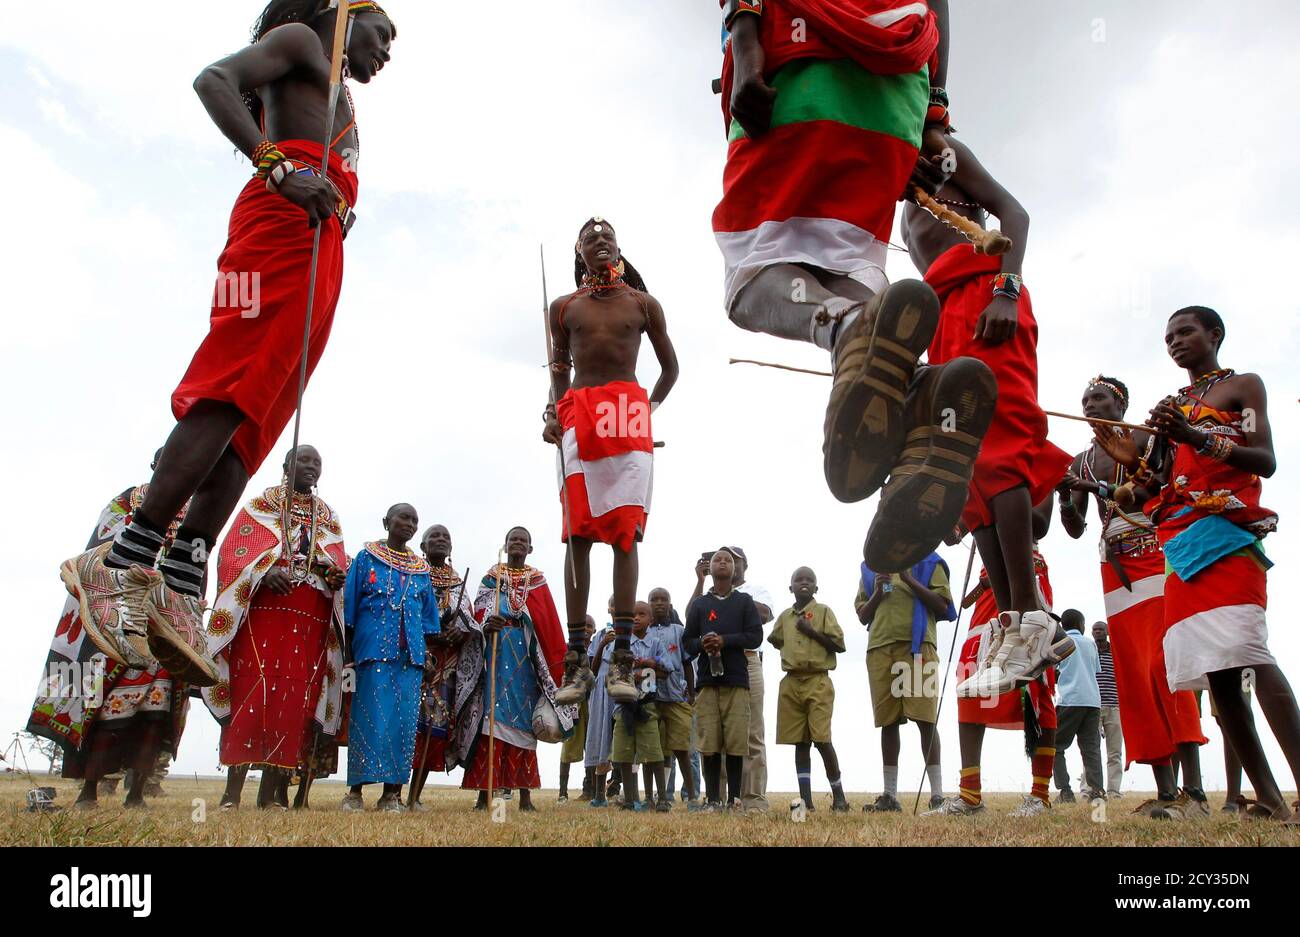 Members of the Maasai Cricket Warriors sing and jump to their traditional rhythm after their T20 cricket match against the Ambassadors of Cricket from India in the Ol Pejeta conservancy in Laikipia national park, June 6, 2013. The Maasai Cricket Warriors are role models in their communities where they actively campaign against retrogressive and harmful cultural practices, such as female genital mutilation and early childhood marriages, while fighting to eradicate discrimination against women in Maasailand. Through cricket, they hope to promote healthier lifestyles and to also spread awareness  Stock Photo